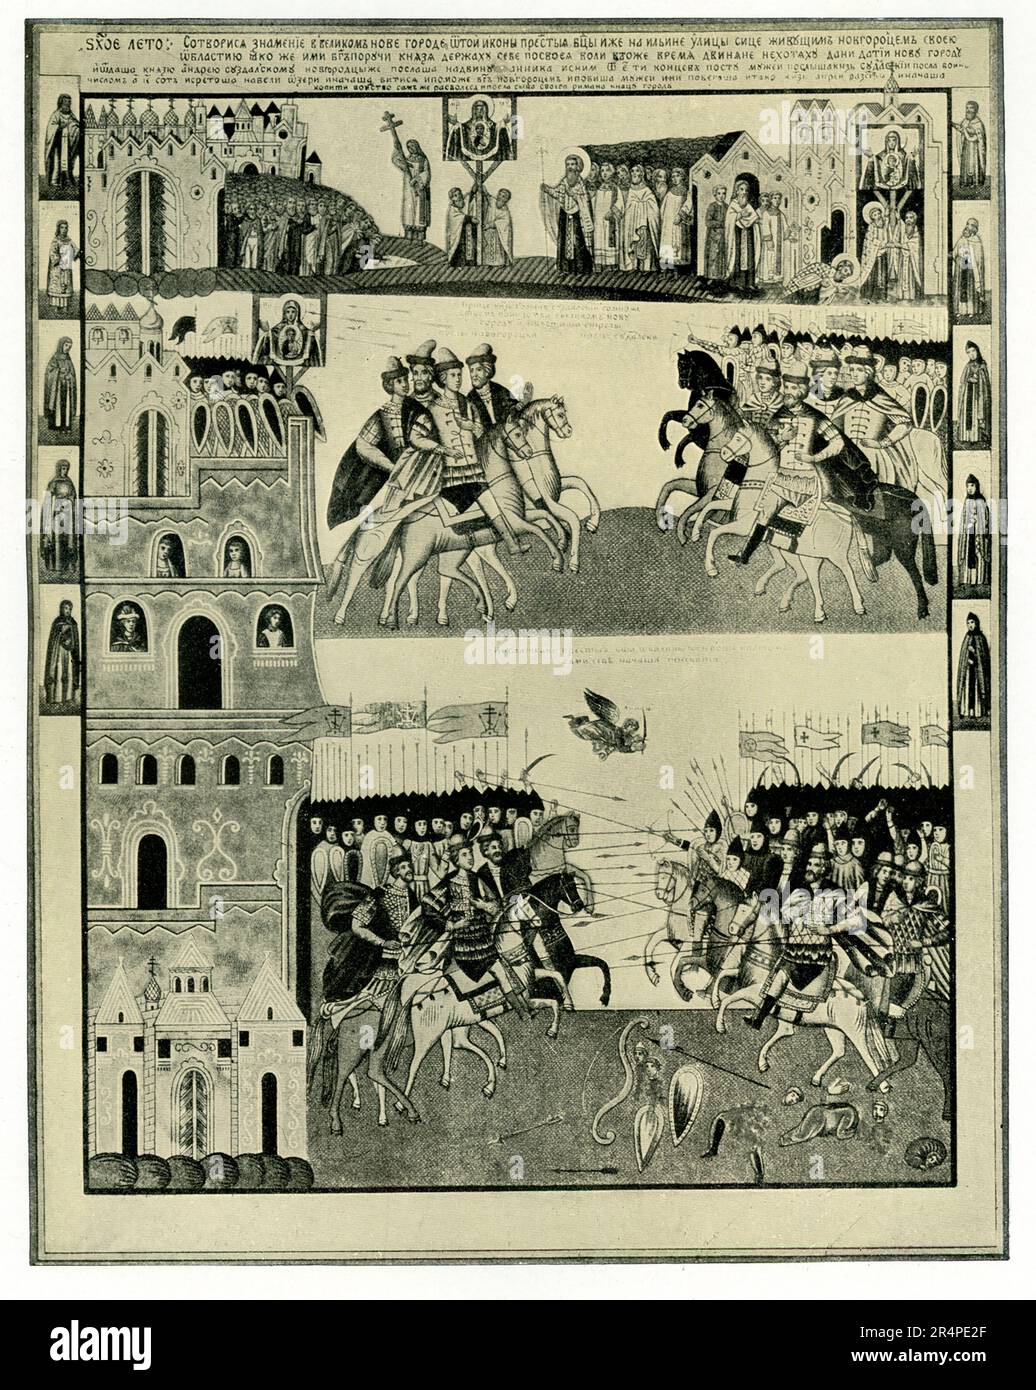 This panel painting dates to the 12th century (since restaored) and depicts the 1169 battle of Novgorod between the Novogorodians with the Suzdalians . It was believed that the city of Novgorod was miraculously delivered from a besieging army from Suzdalia (the area around Vladimir, Suzdal, and Moscow.) The old icons depicting this battle became religious icons. Stock Photo